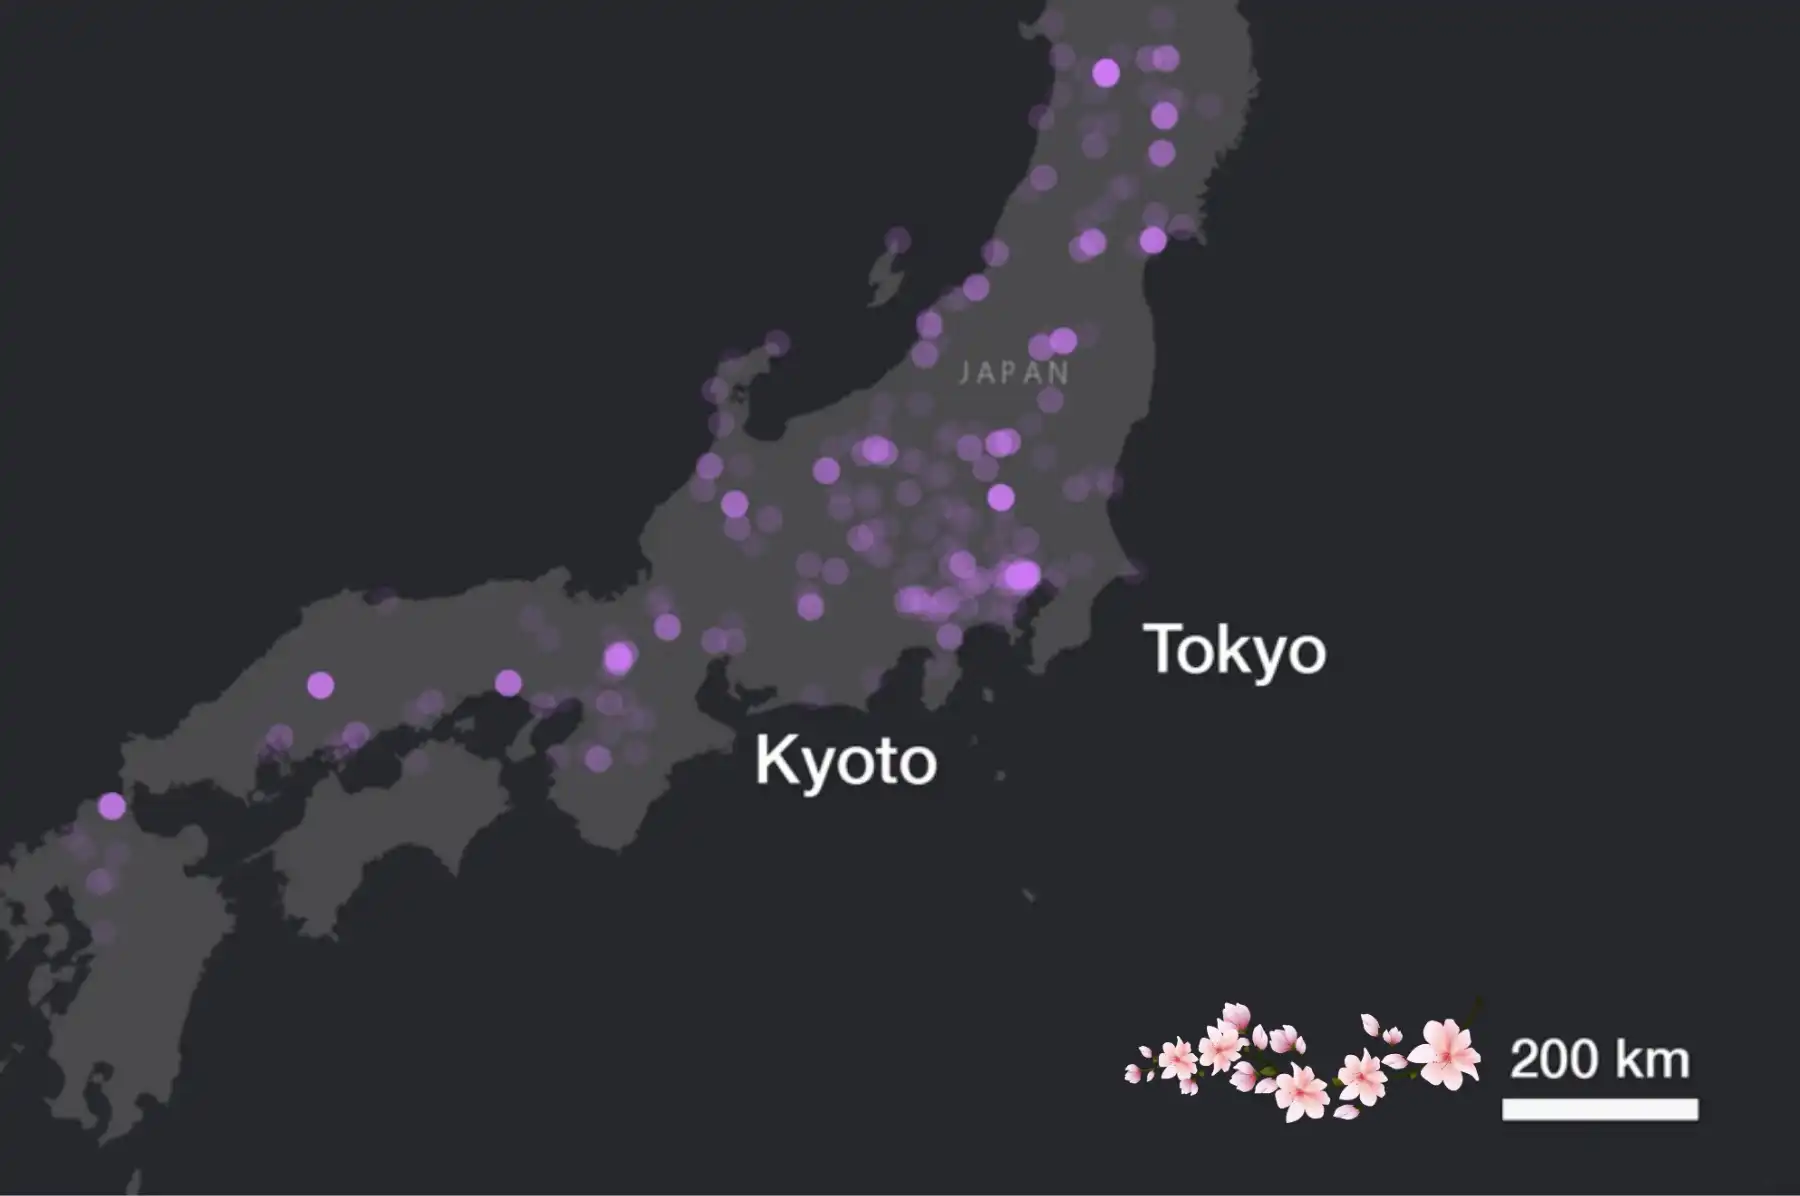 Social media cherry blossom blooms and AI helping to track climate patterns